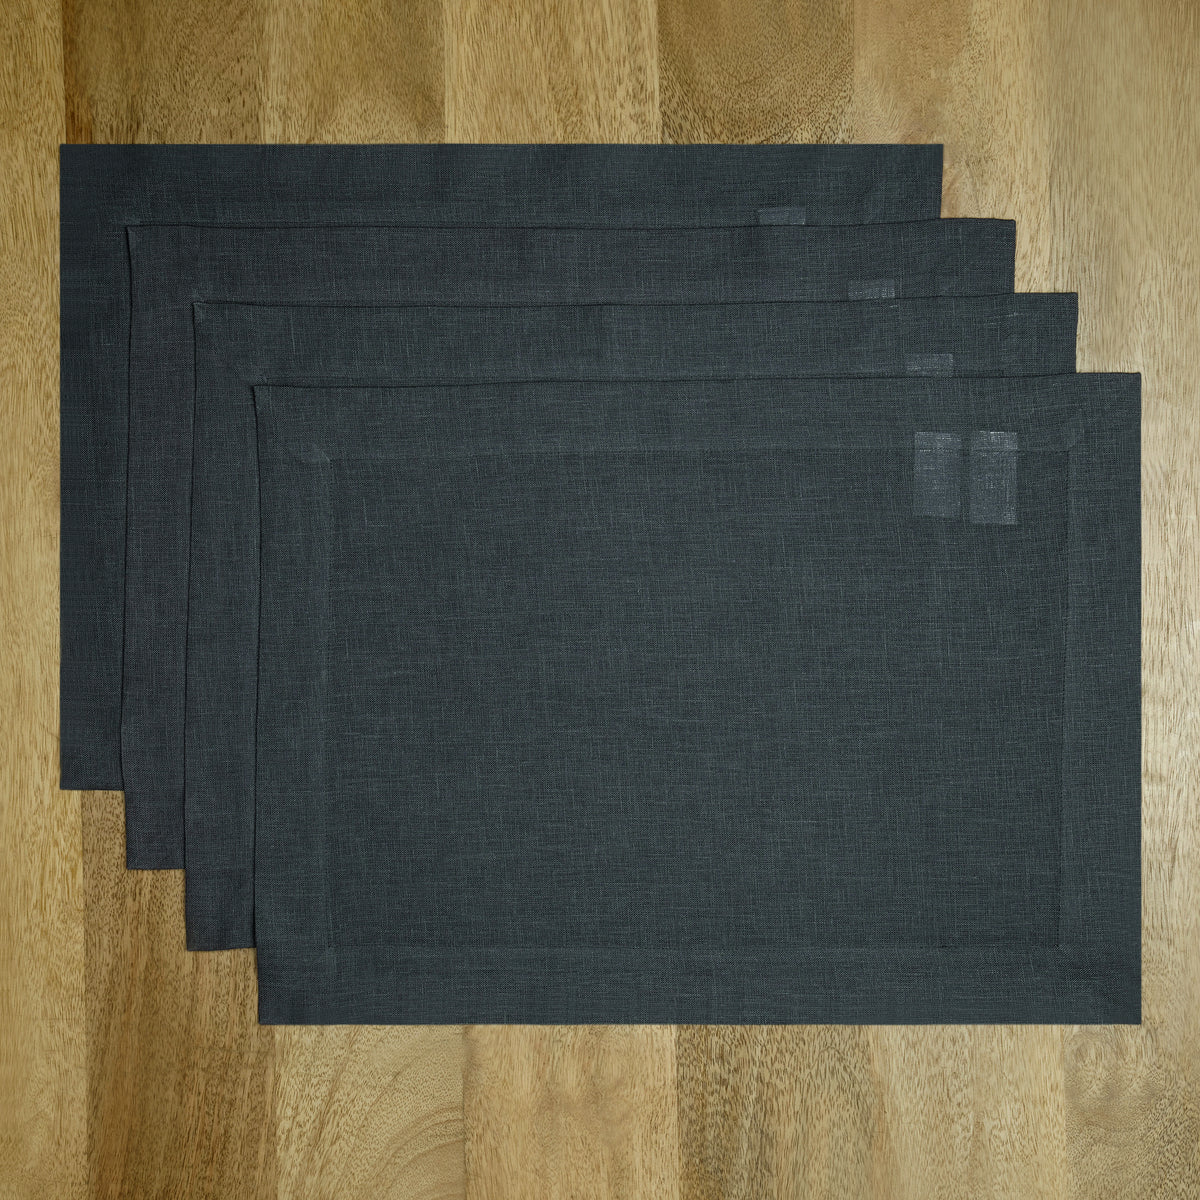 Charcoal Grey Linen Placemats 14 x 19 Inch Set of 4 - Hemmed